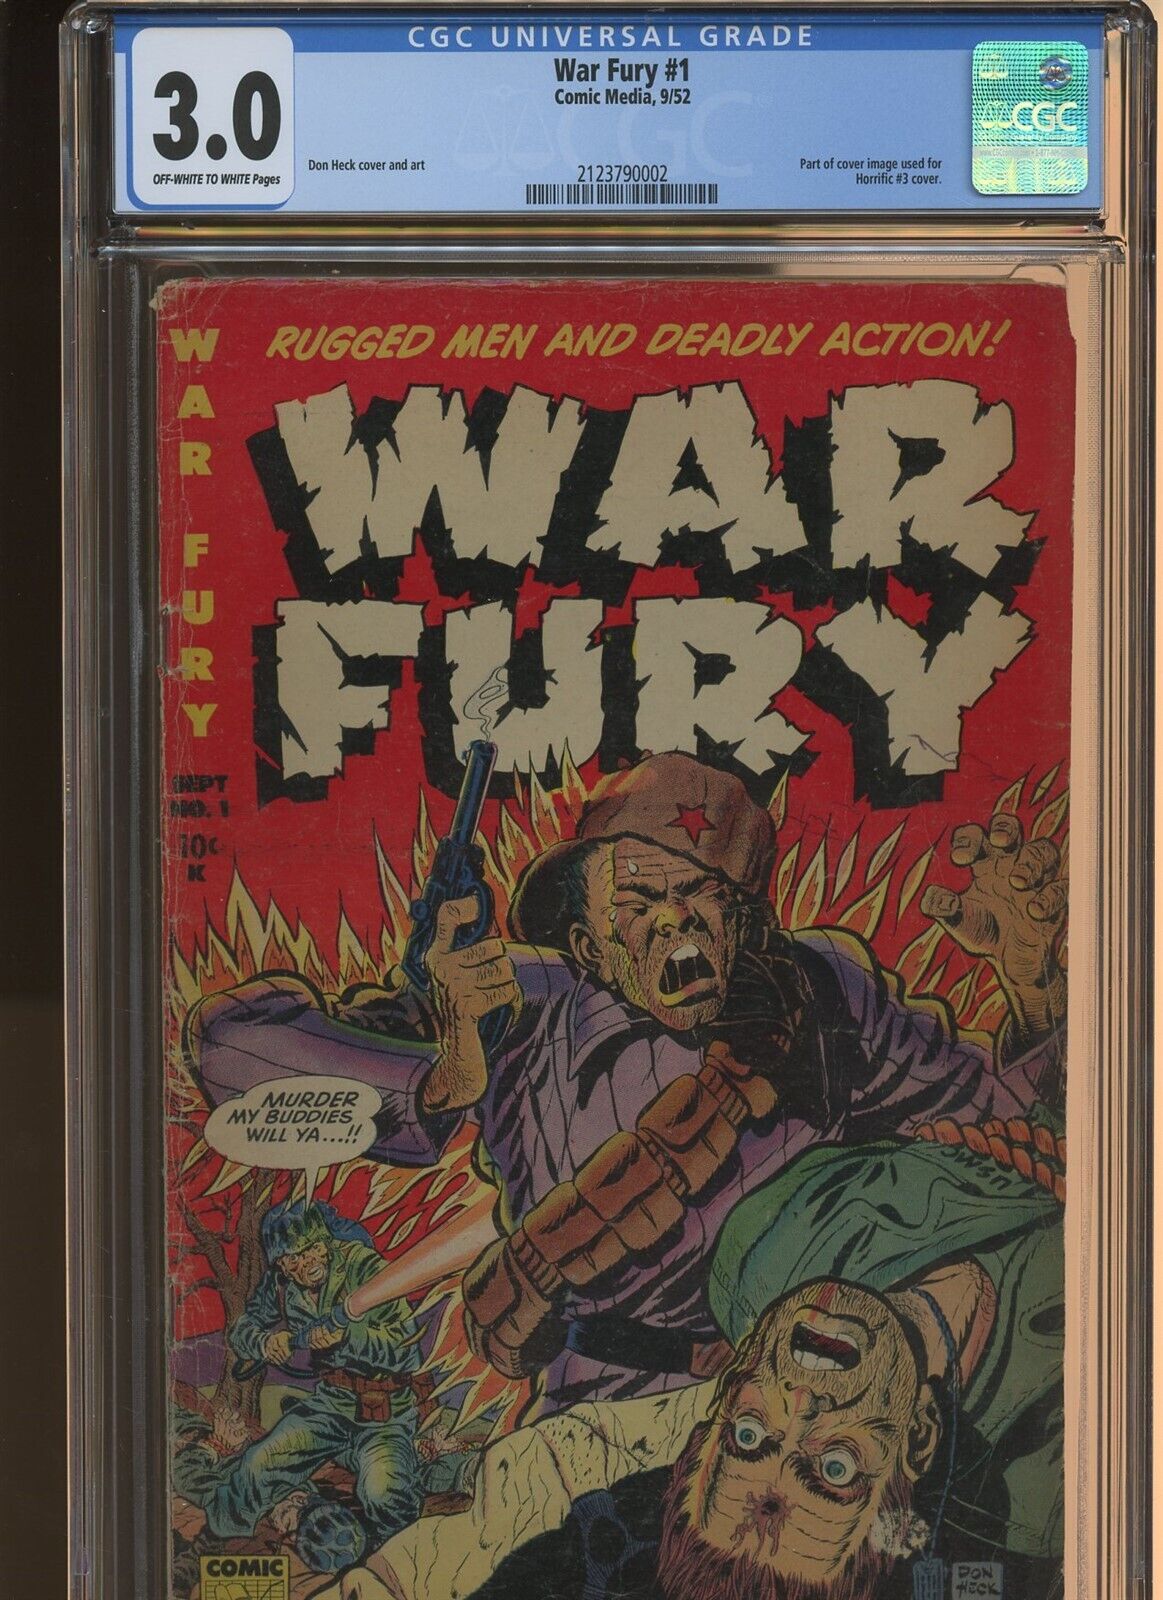 War Fury 1 CGC 30  Comic Media 1952  Part of Cover Used for Horrific 3